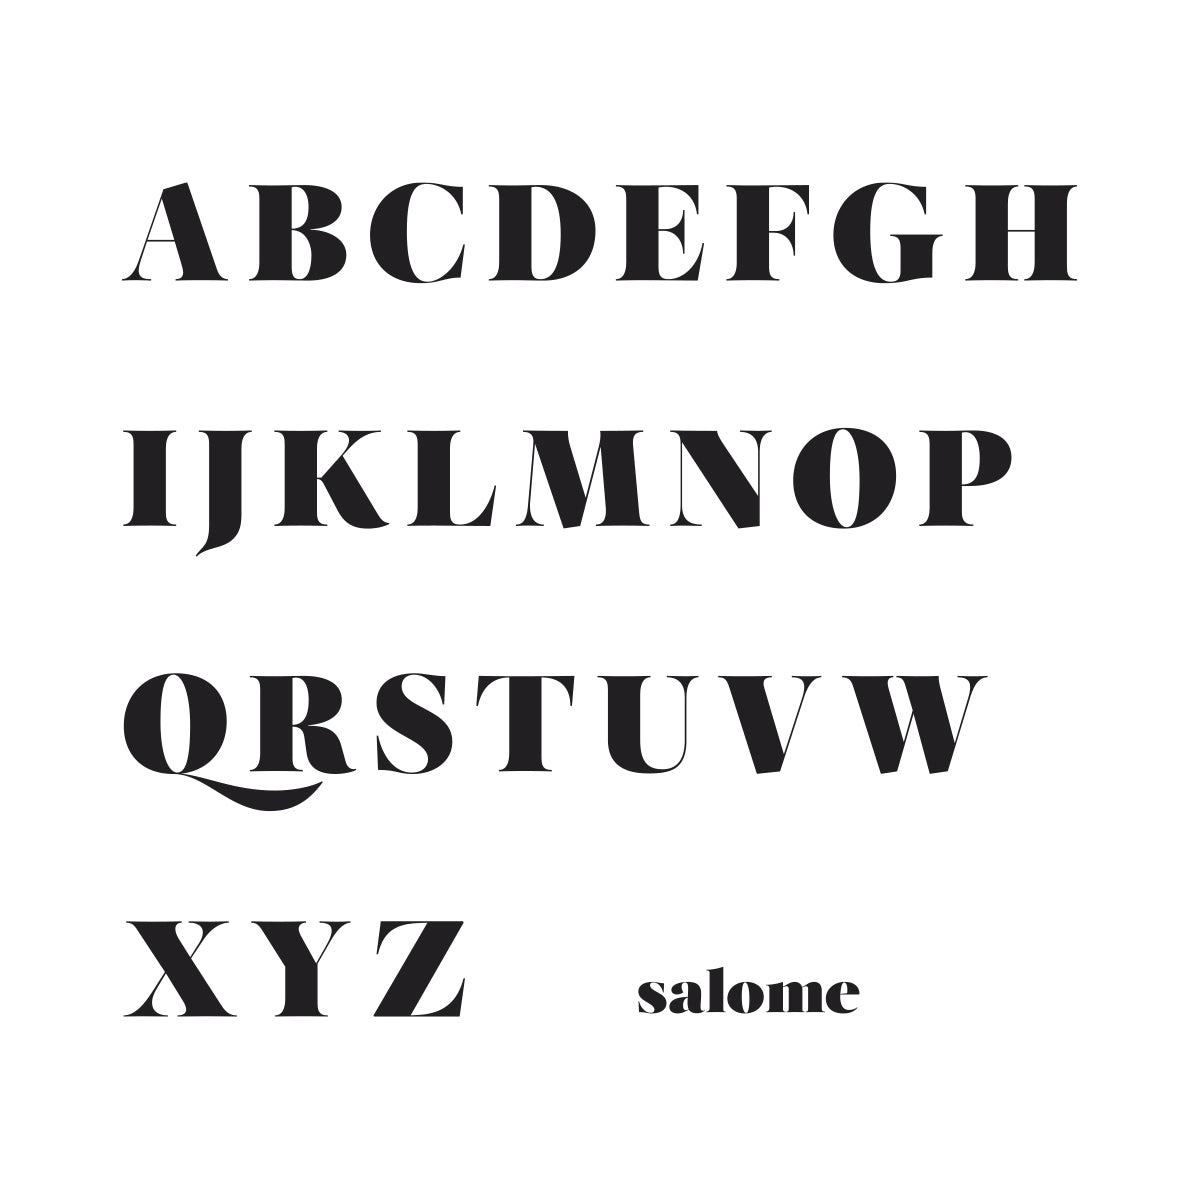 Salome Written Number-1 Line.